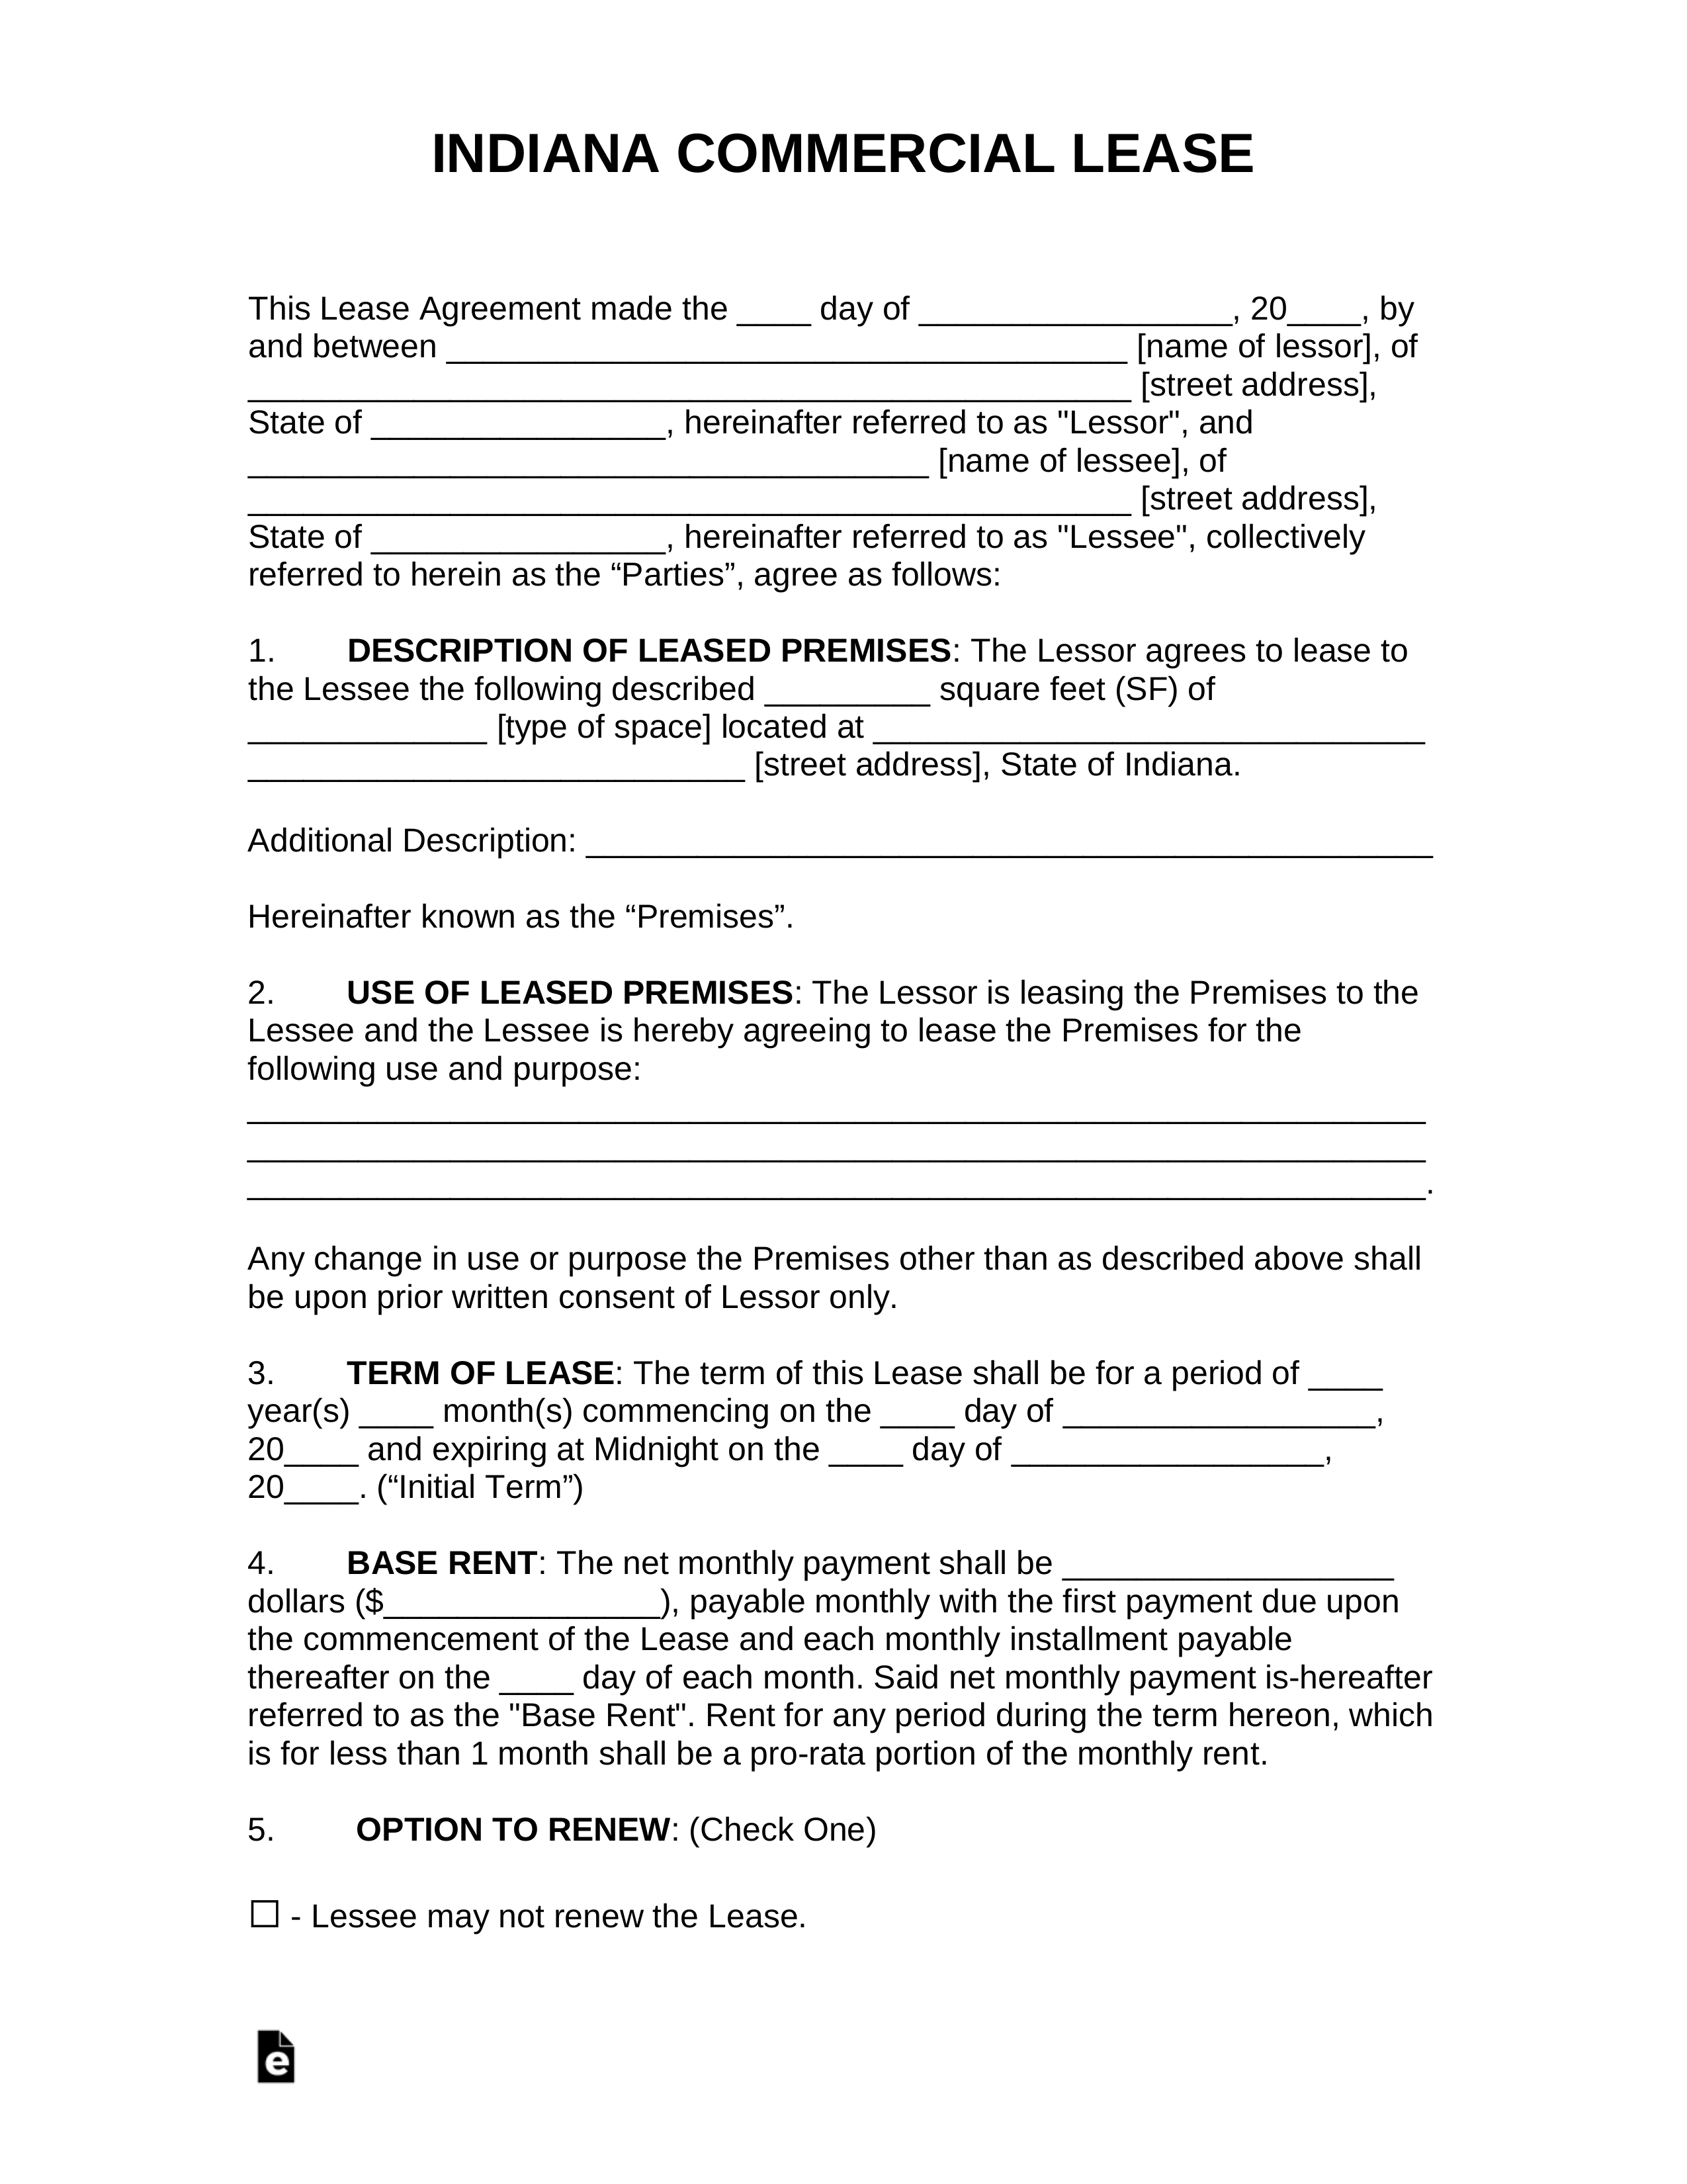 Free Indiana Commercial Lease Agreement Template - Pdf pertaining to Business Lease Agreement Template